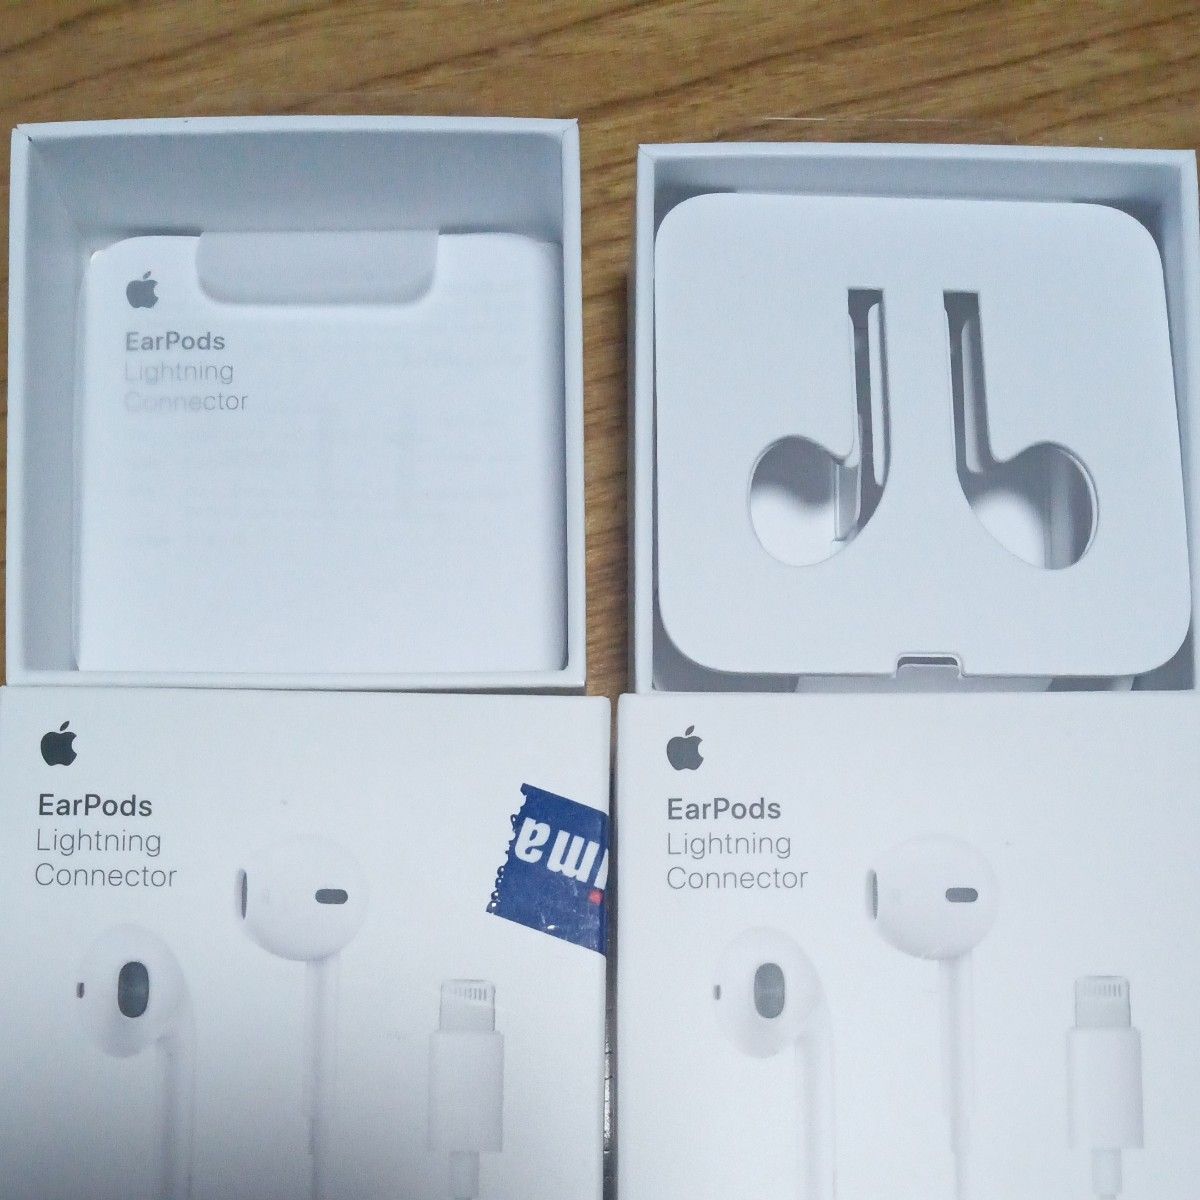 EarPods with Lightning Connector MMTN2J/A ホワイト 空箱 コレクション 2個おまとめ 